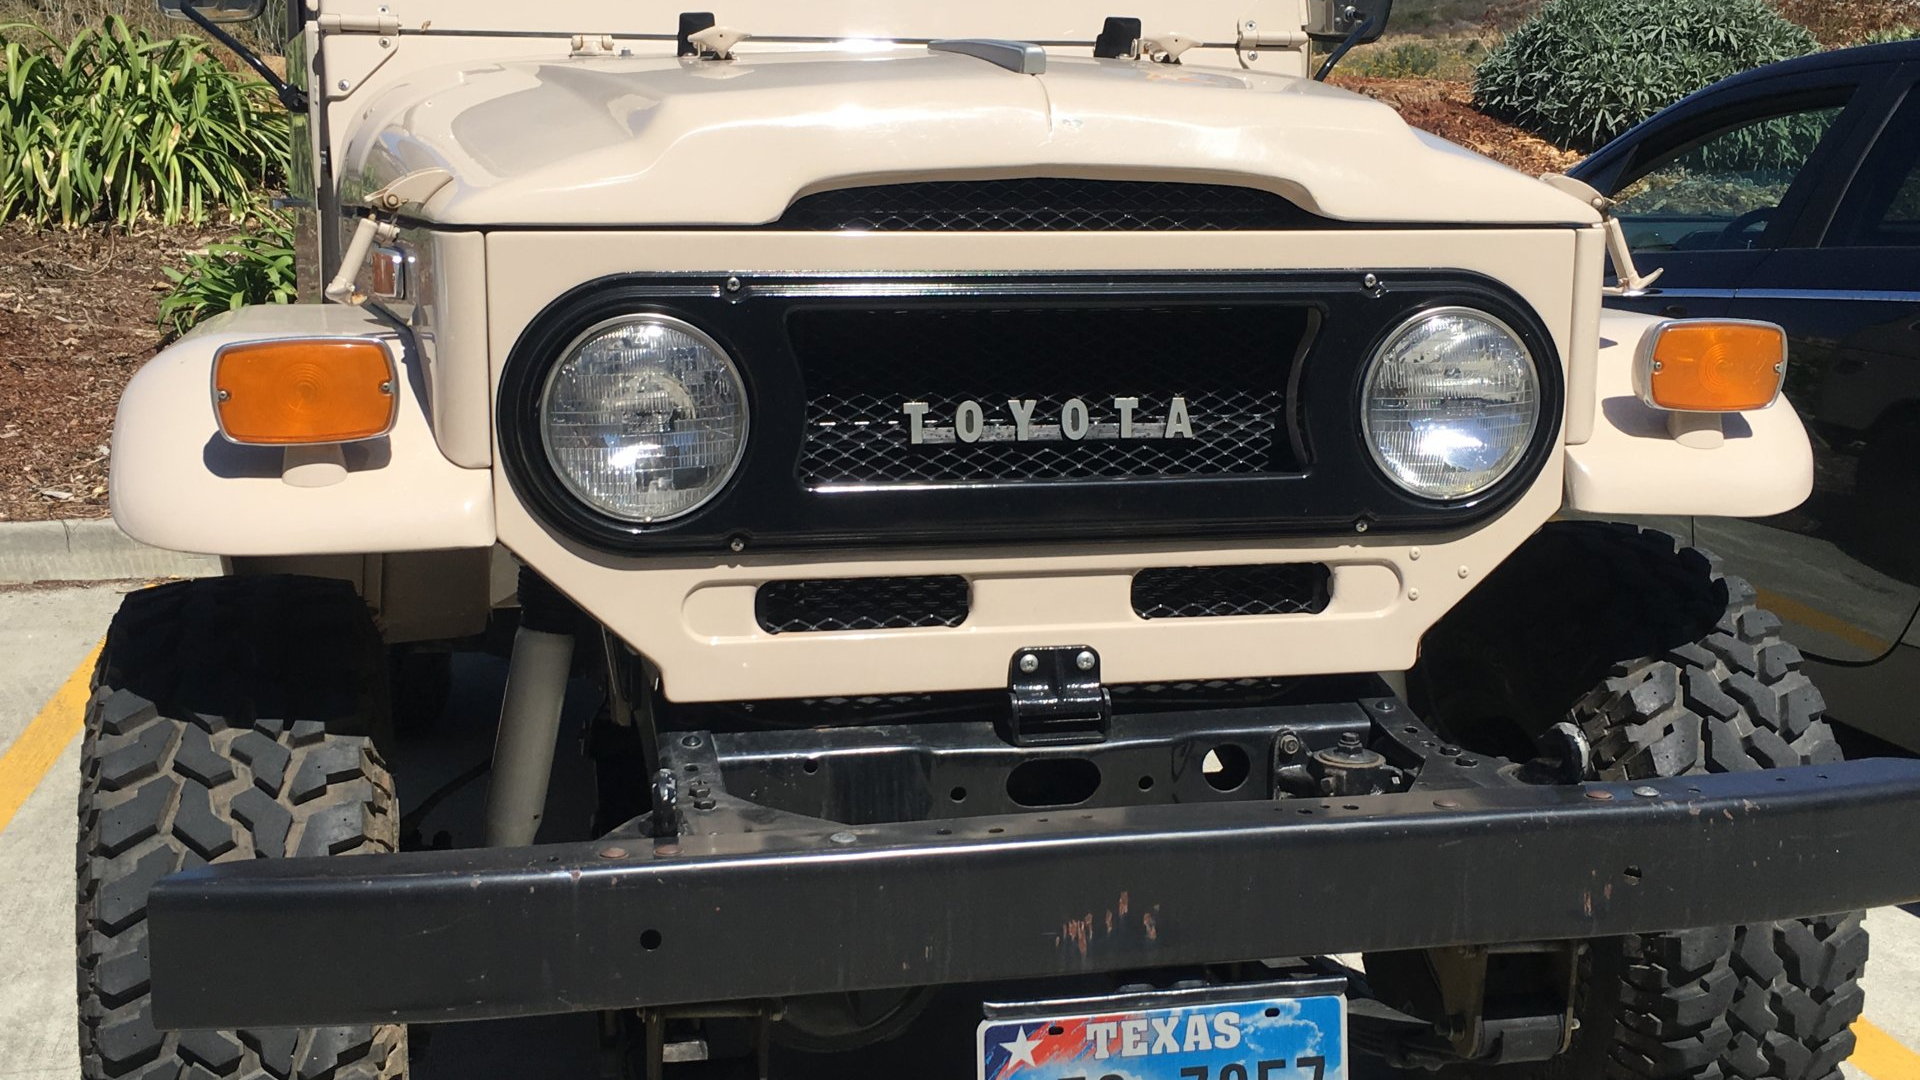 Electric GT "crate" engine project  -  in progress  -  1970 Toyota Land Cruiser